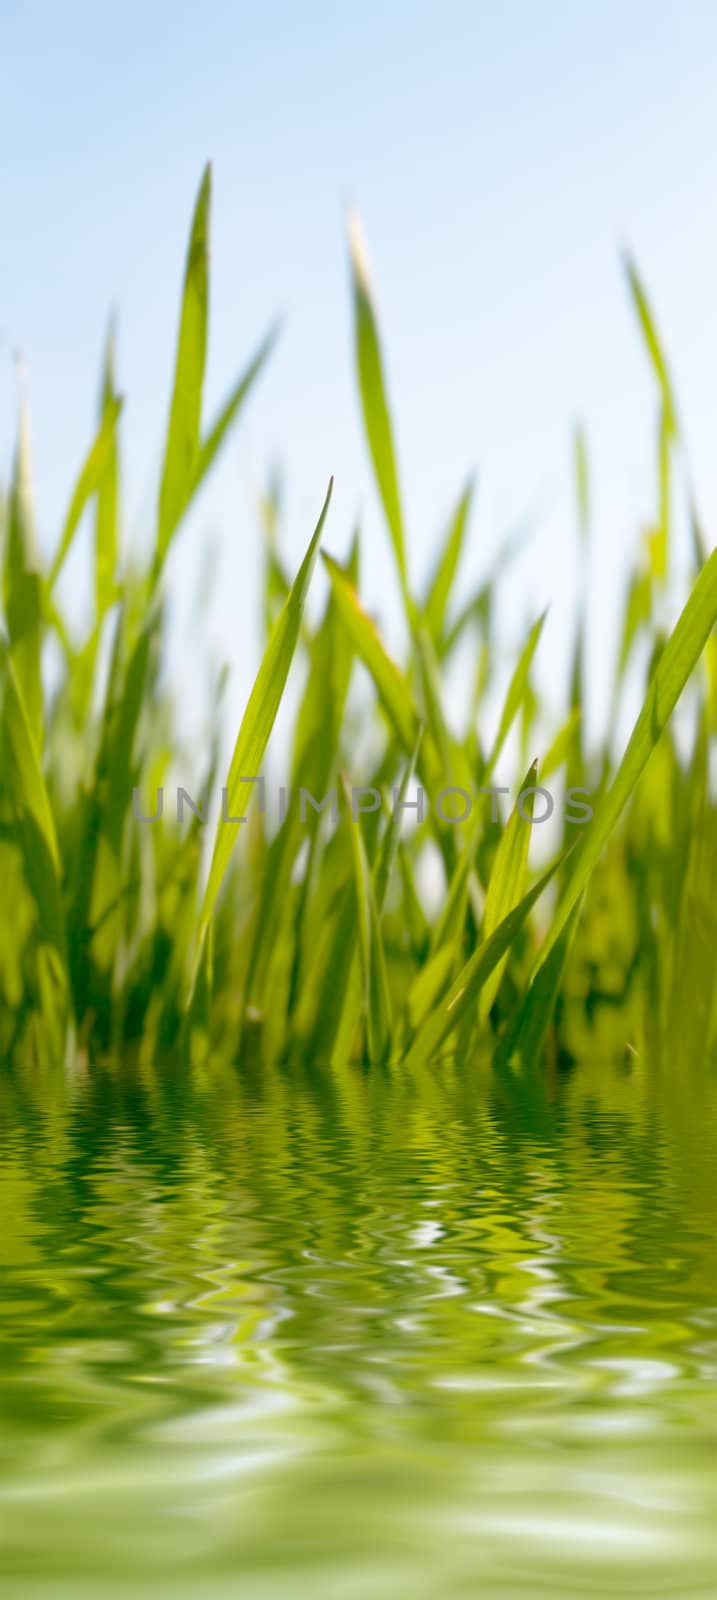 Juicy green grass growing near to water pond